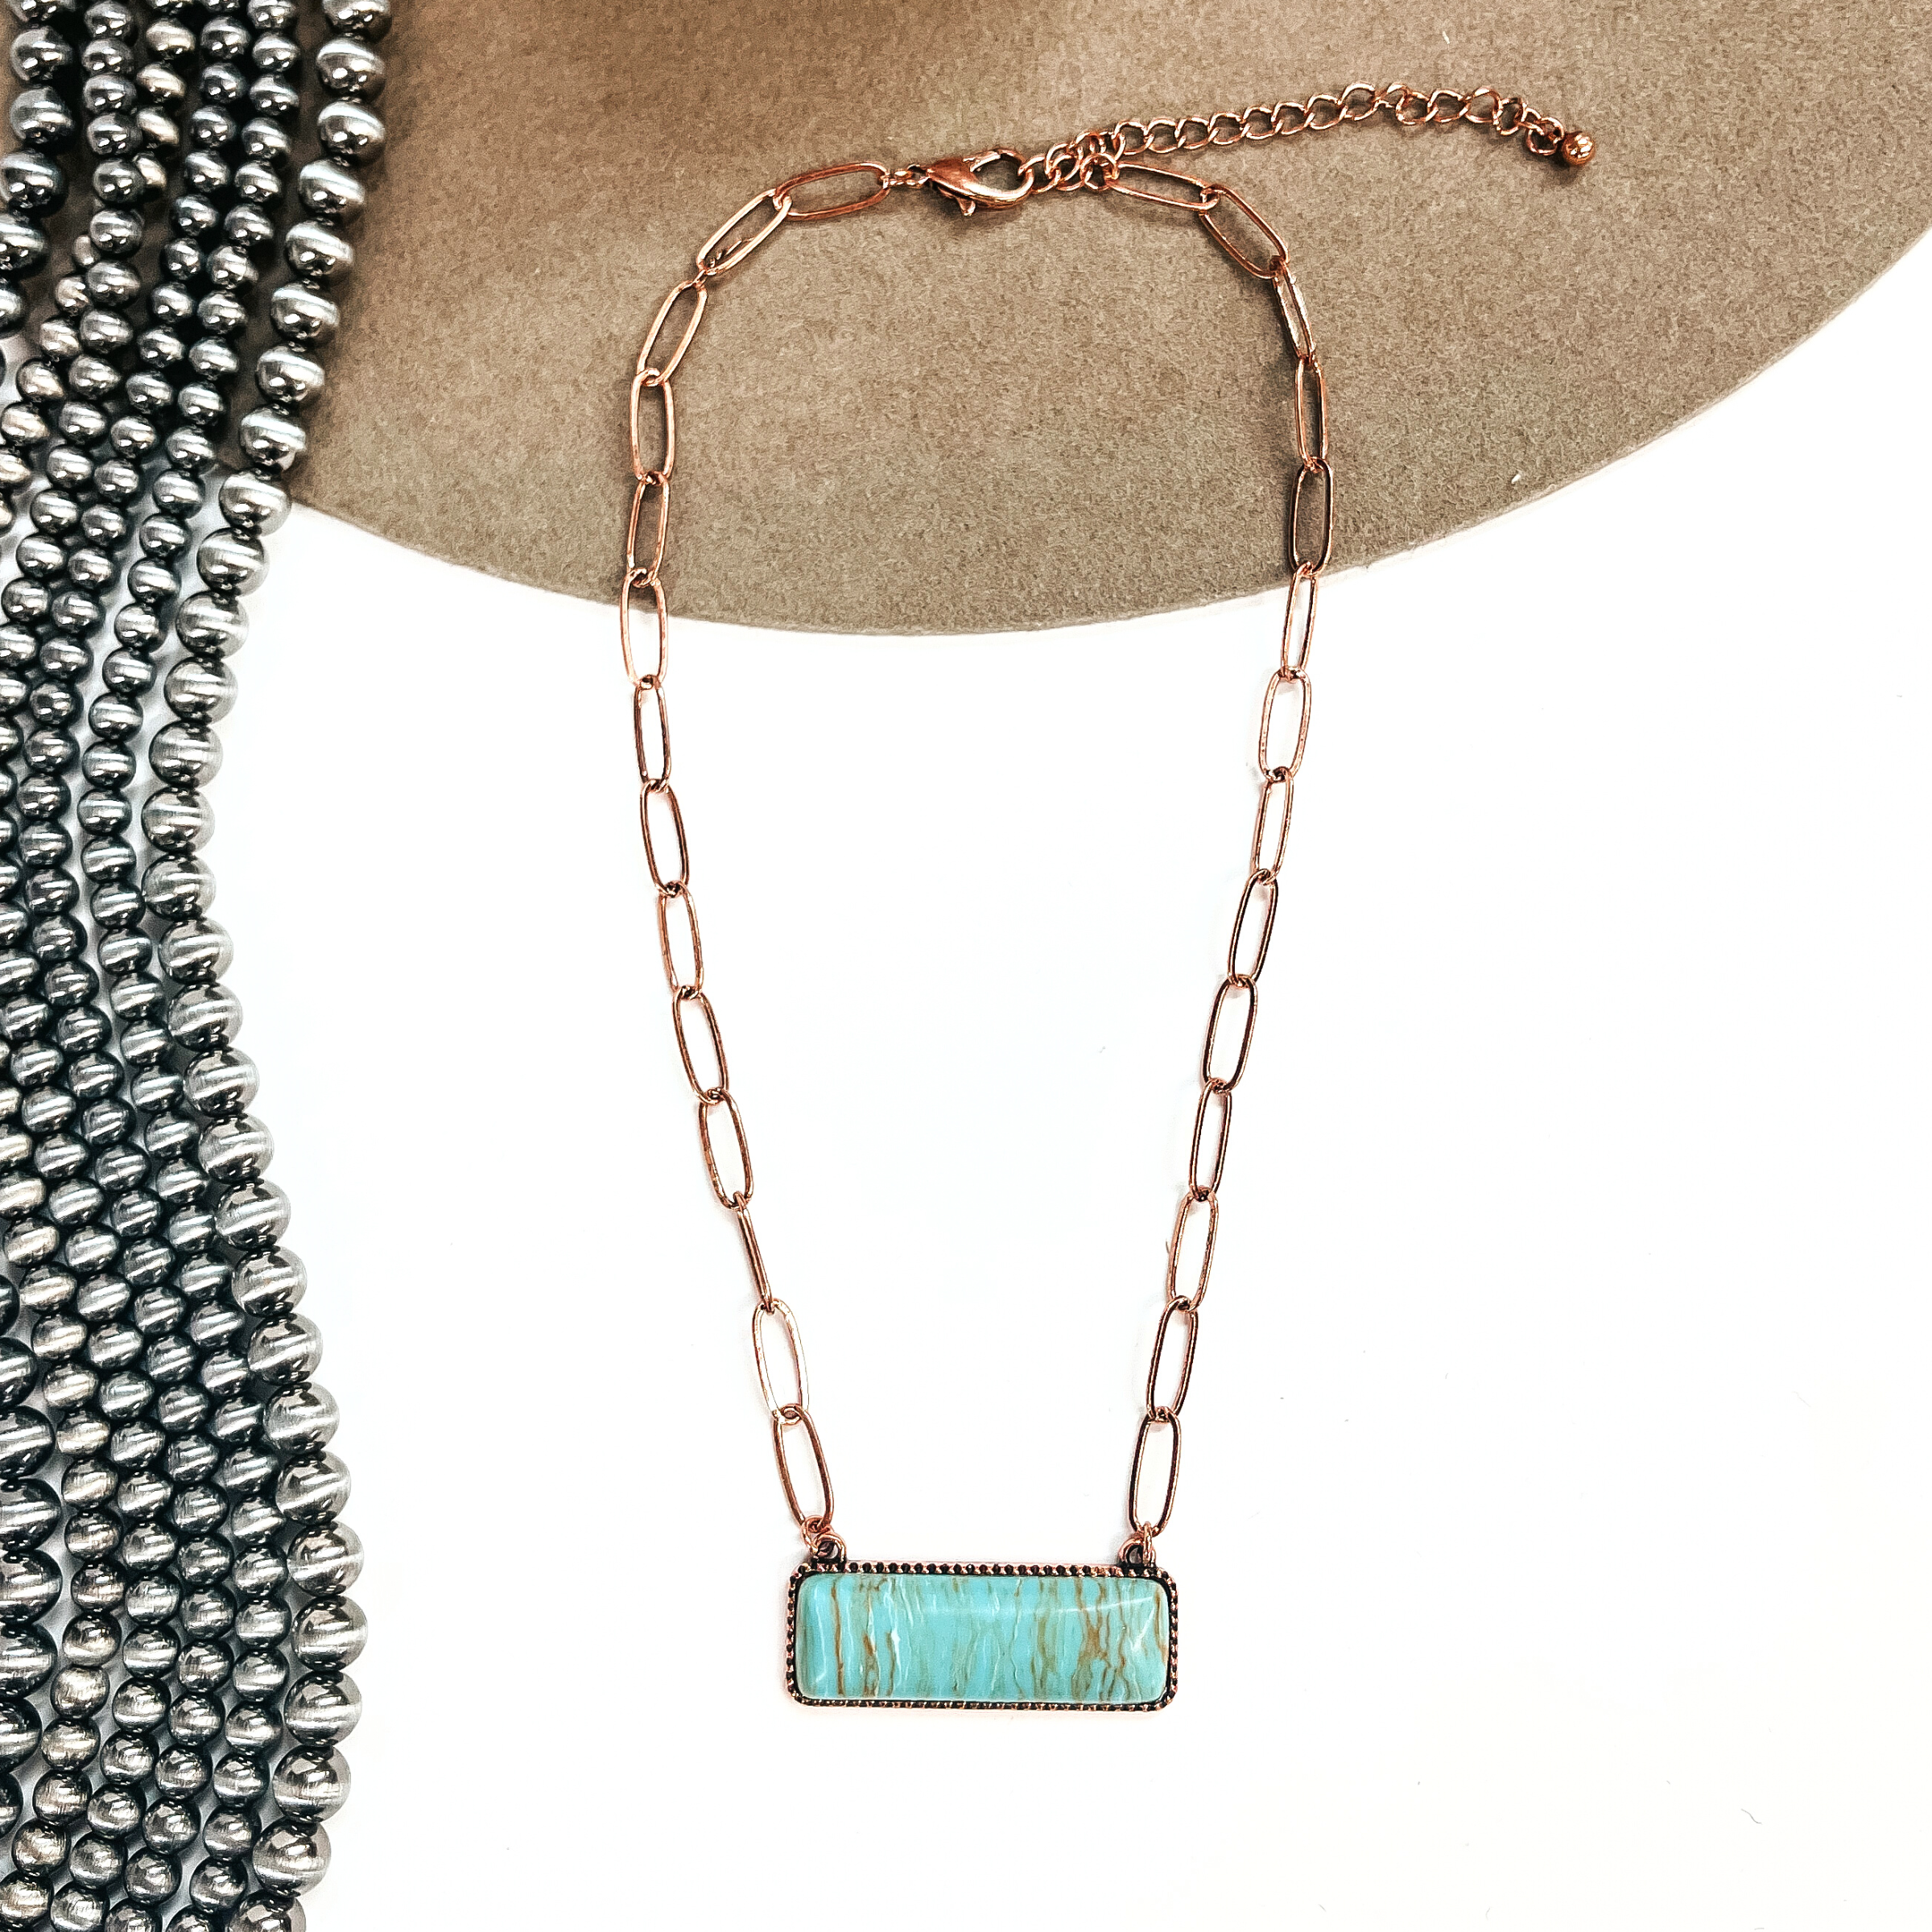 This is a copper tone thin link chain with a rectangle bar pendant in the center. The  rectangle bar pendant has an agate stone in turquoise. This necklace is laying on a white  background and light brown felt hat brim, with silver Navajo beads in the side as decor.